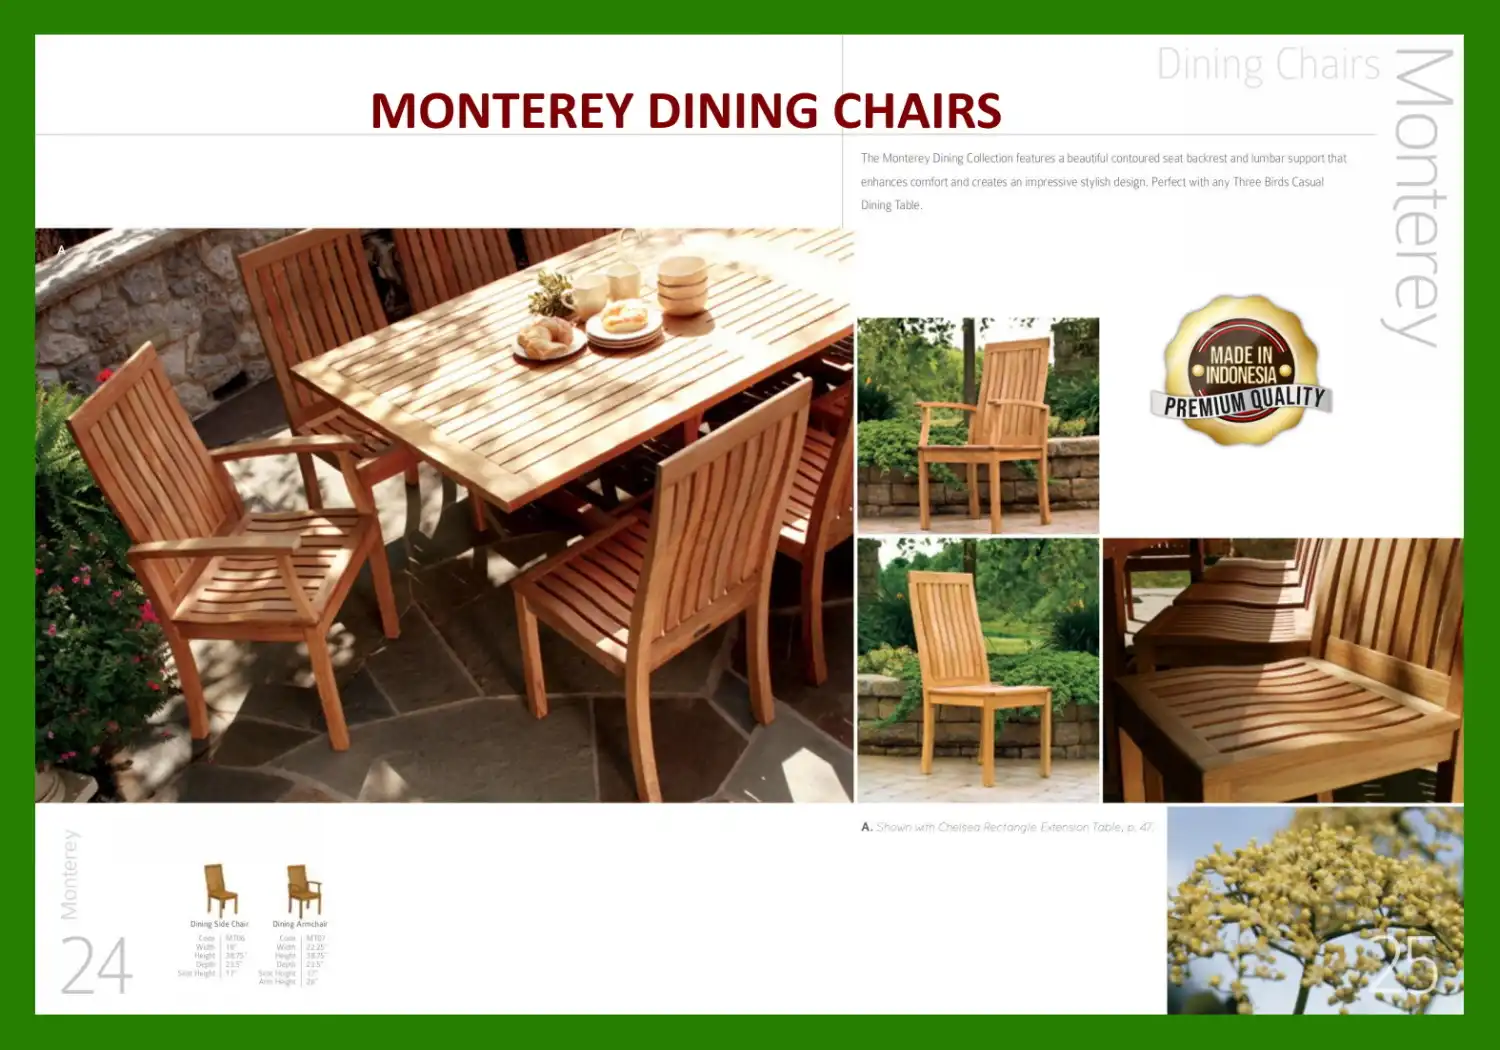 MONTEREY DINING CHAIRS